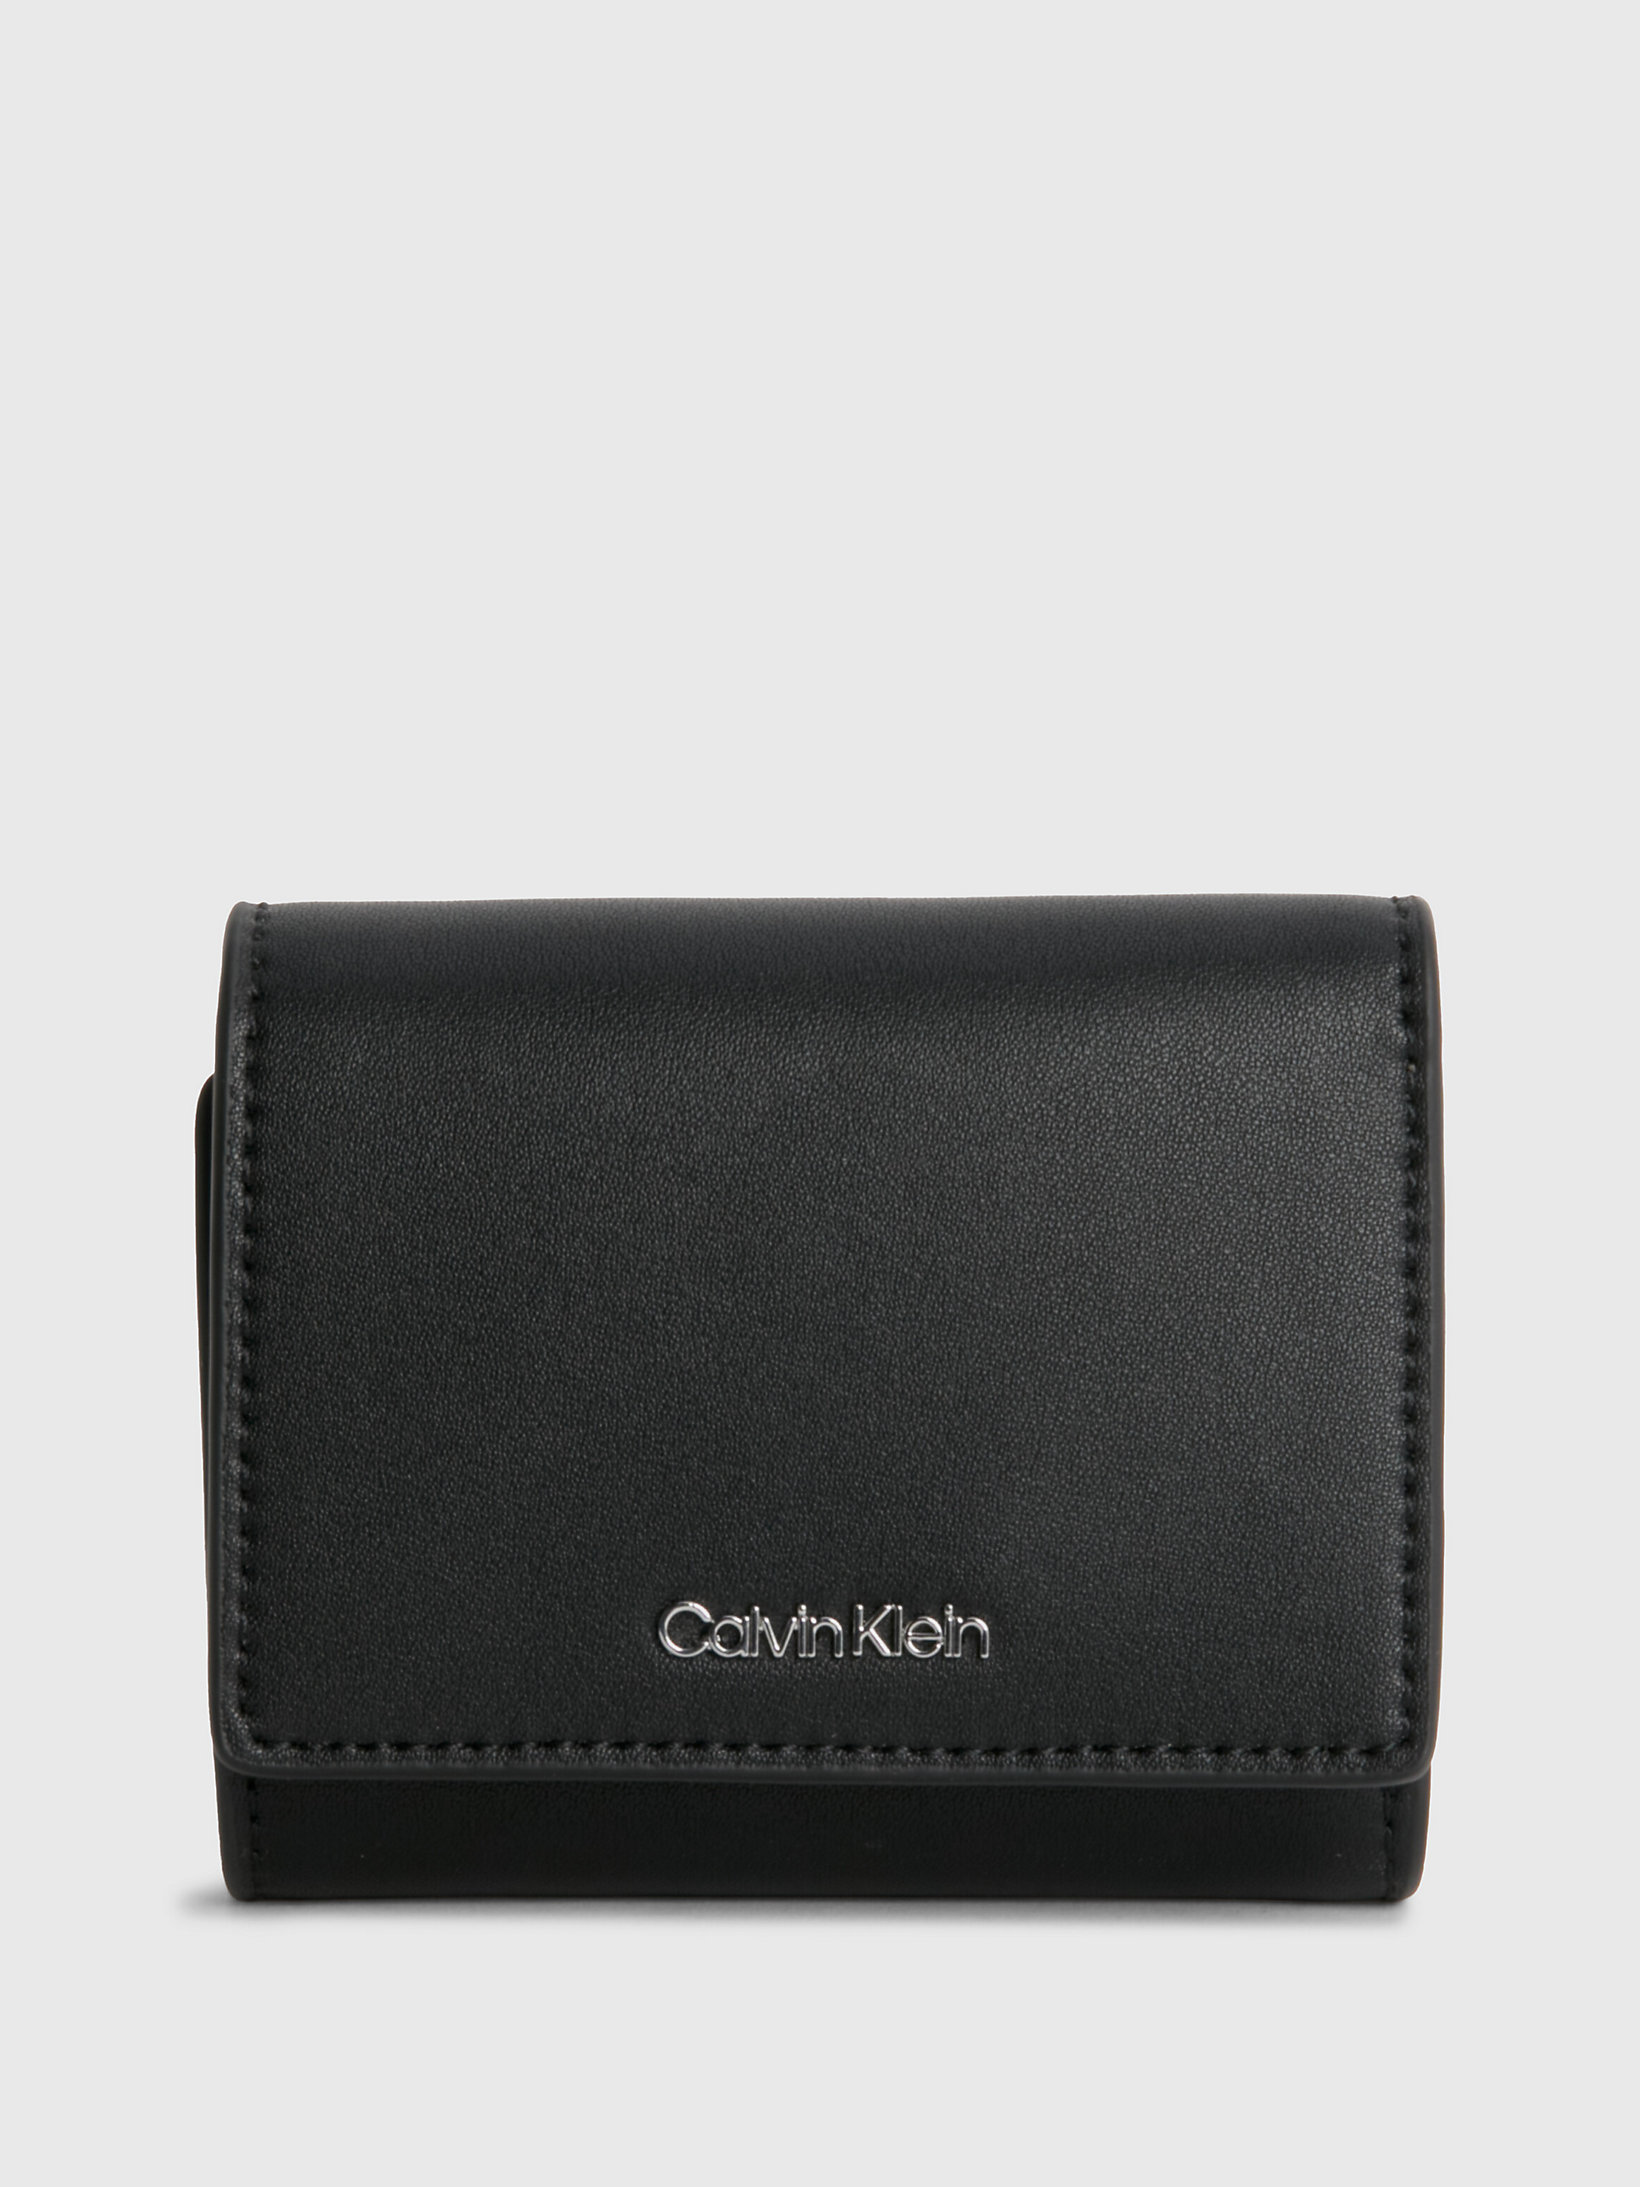 CK Black Small Recycled Trifold Wallet undefined women Calvin Klein